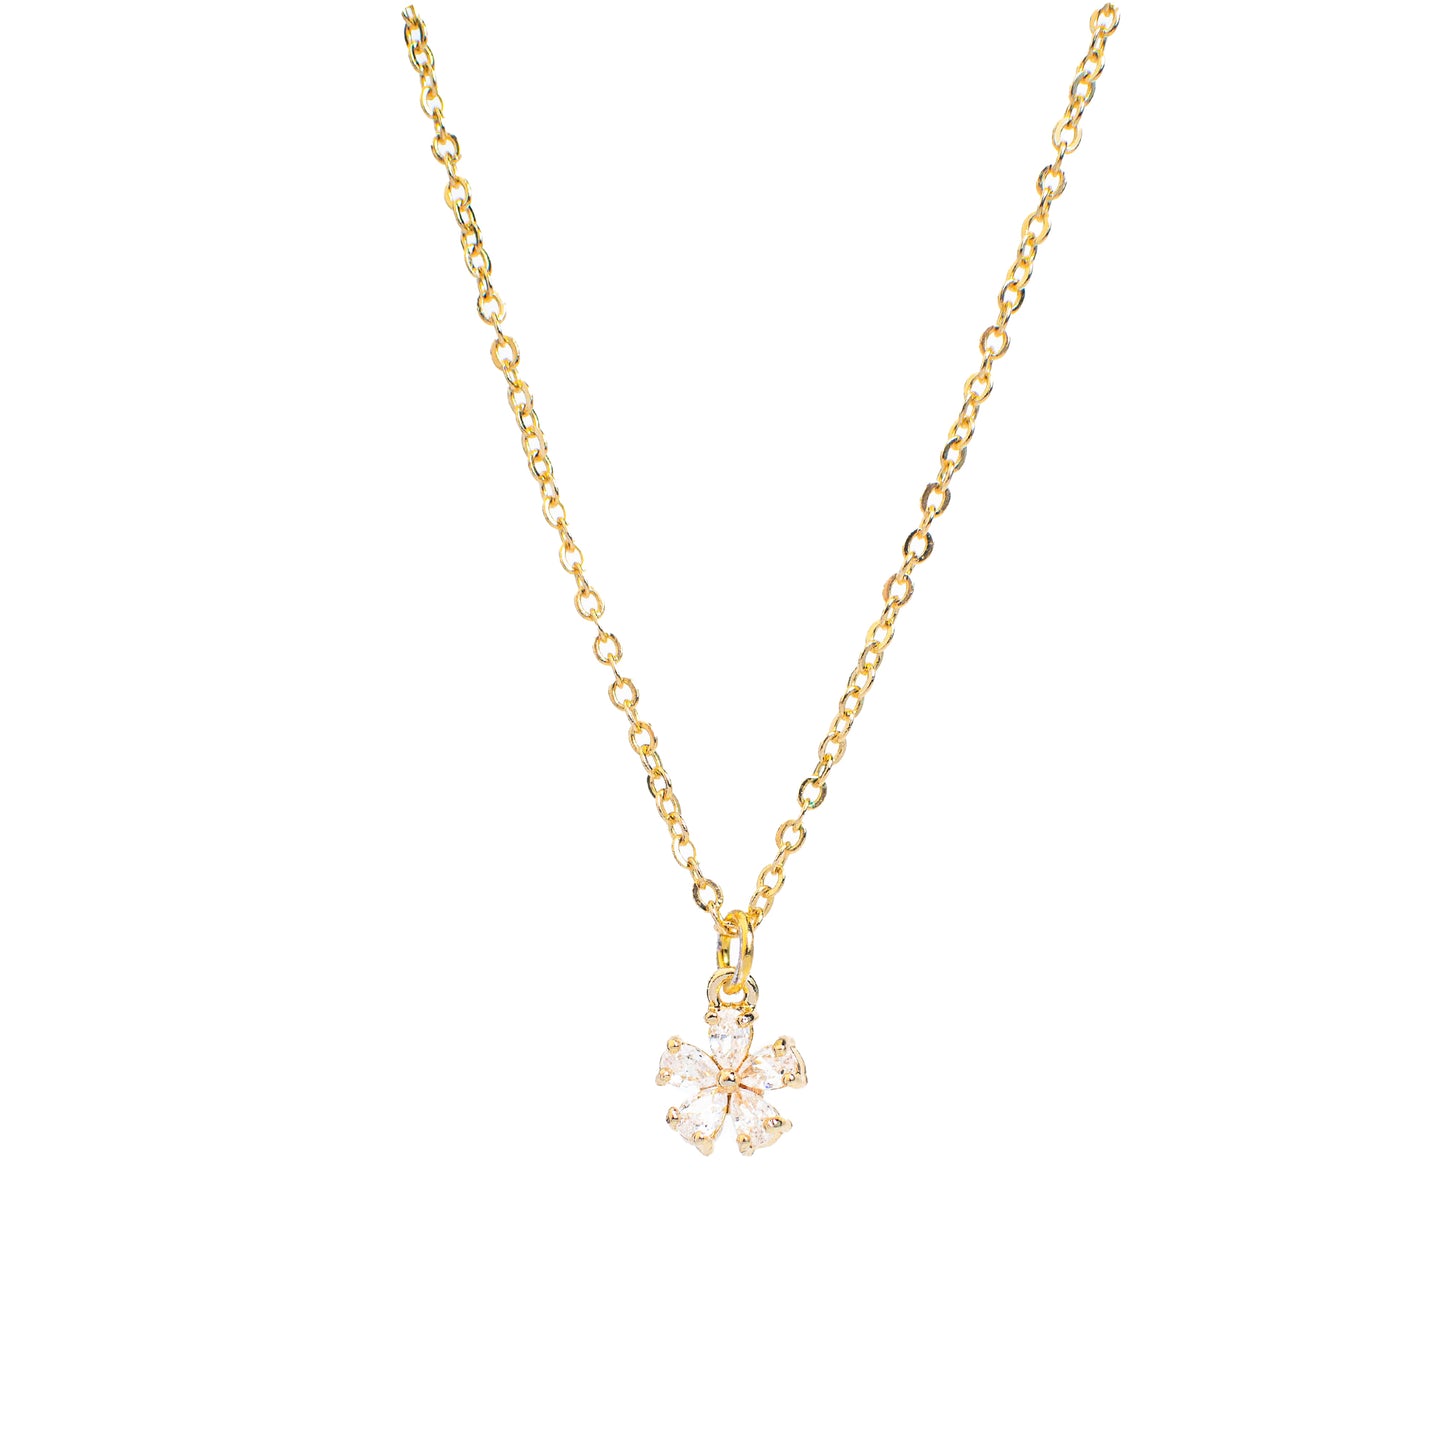 This photo features a thin chain necklace made of 14K gold-plated sterling silver, paired with a zirconia Flower charm.